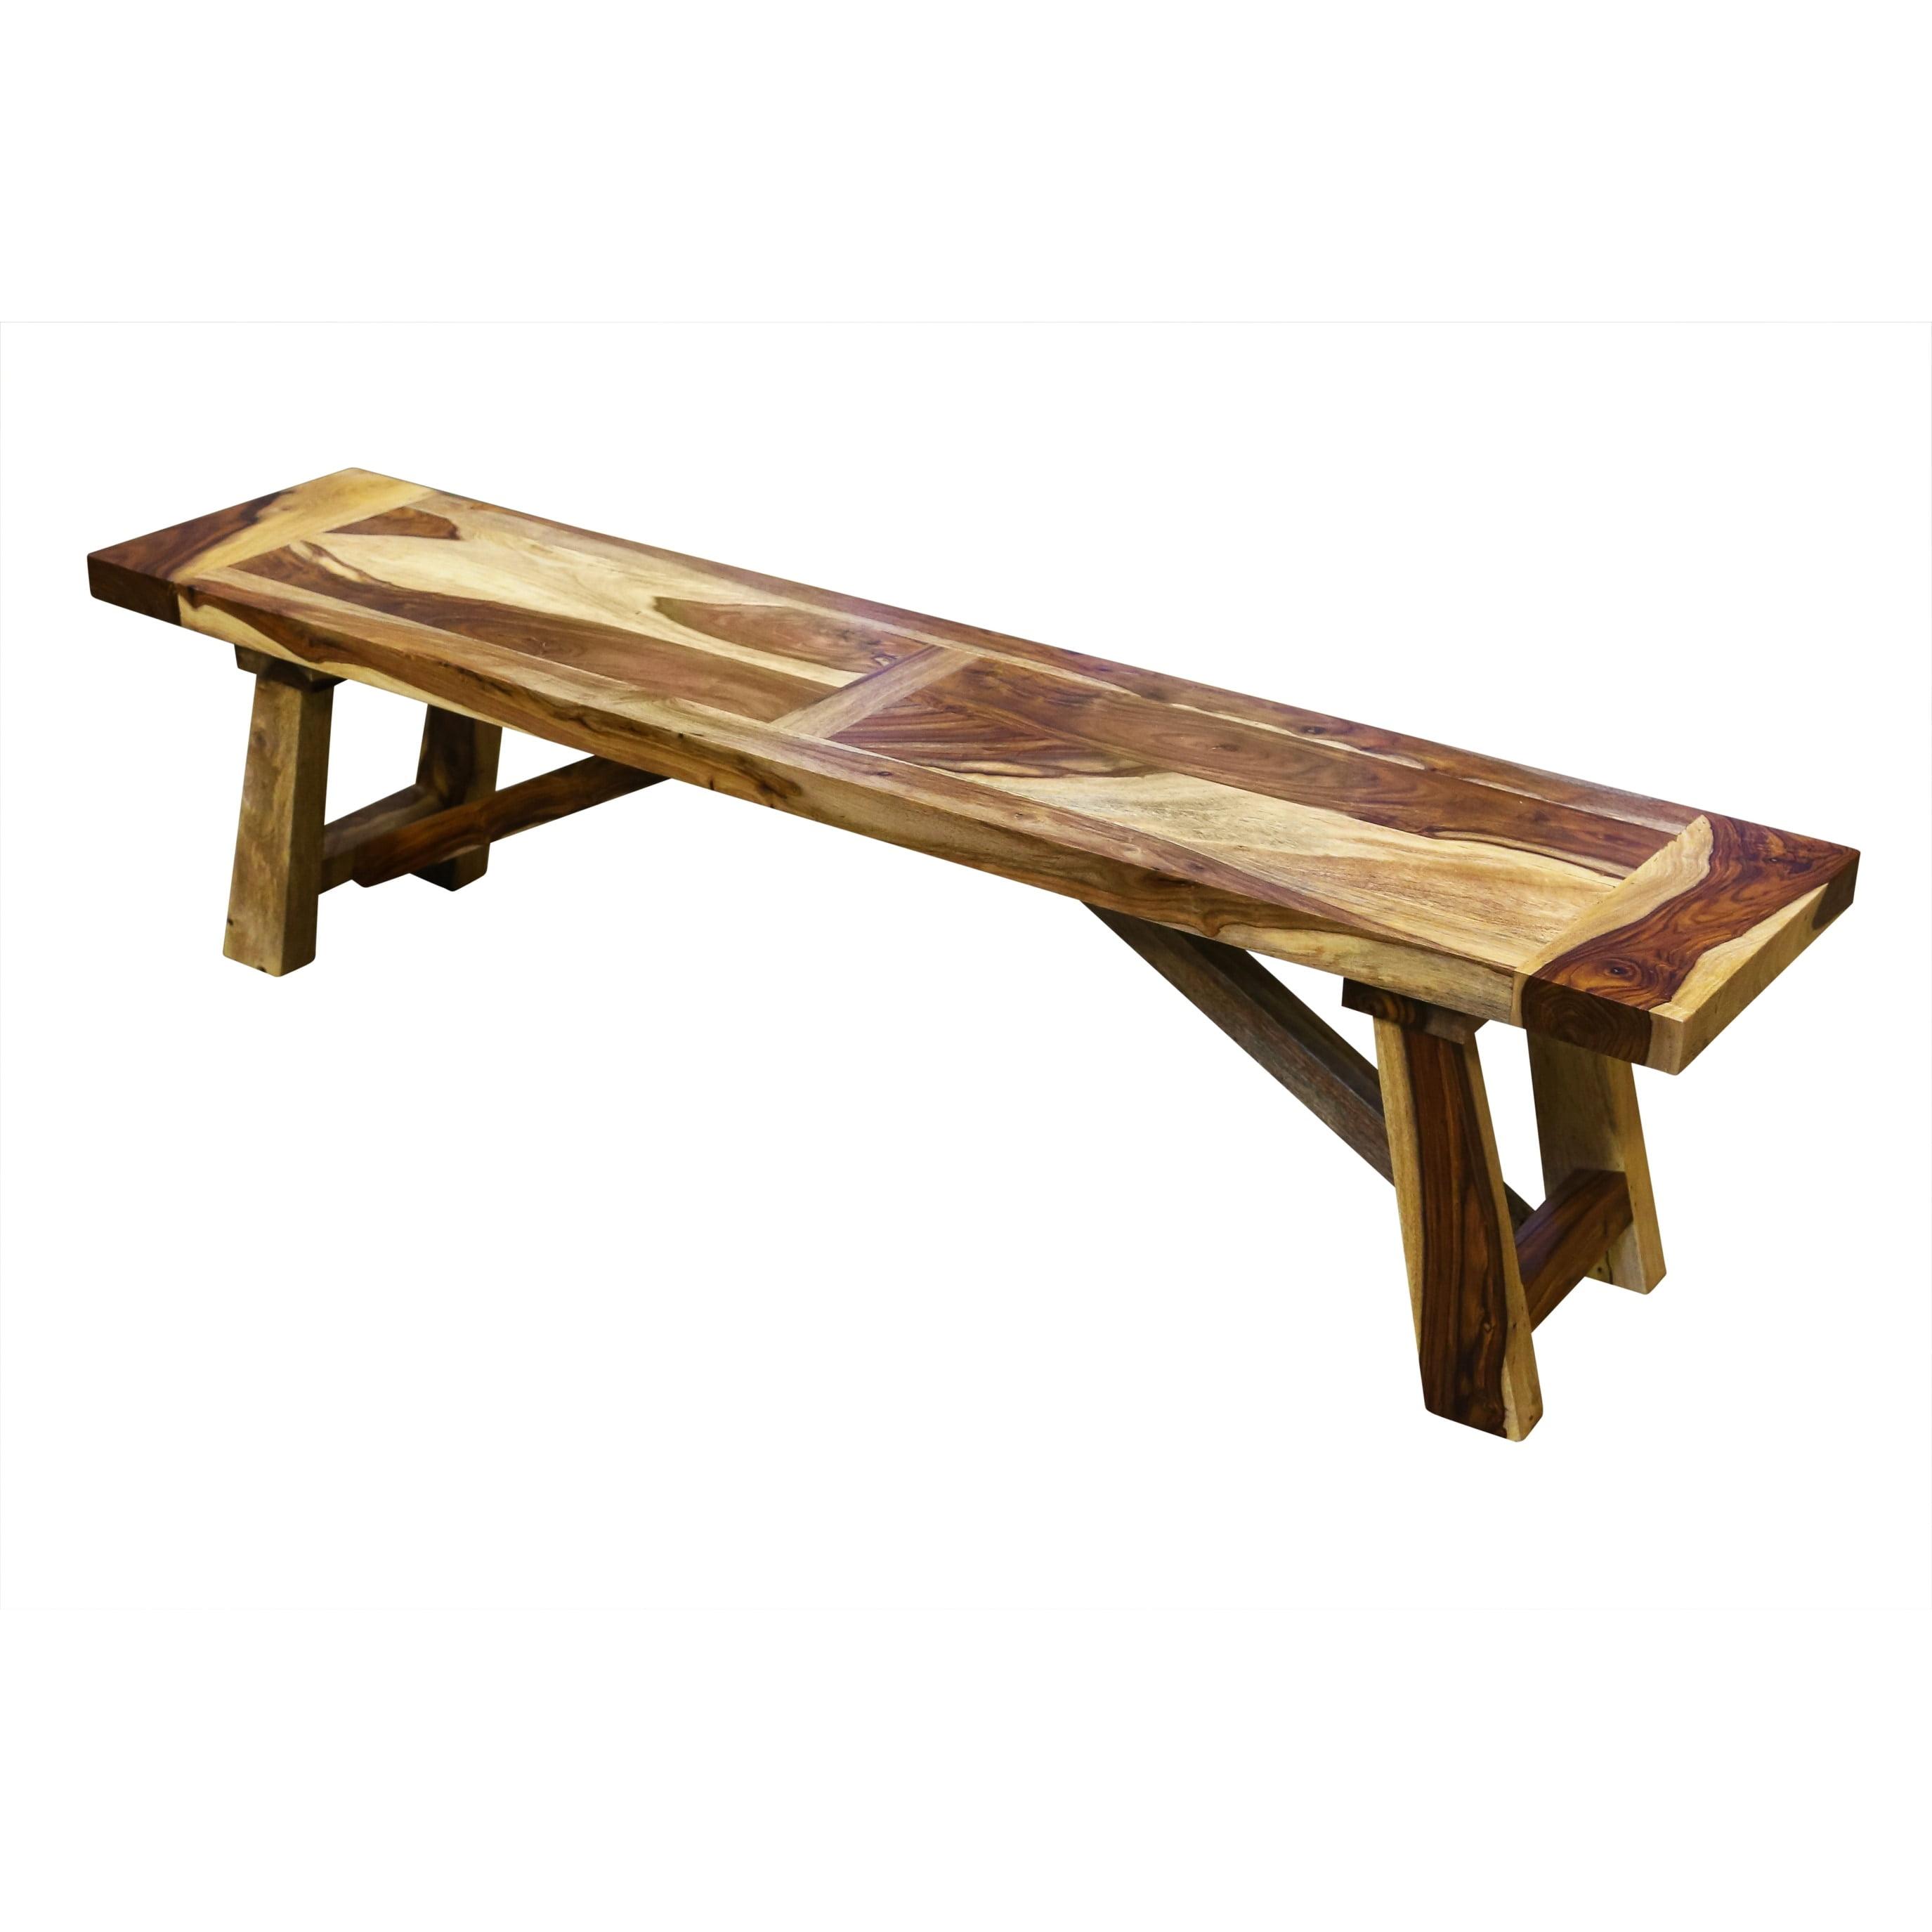 Kalispell 70" Solid Sheesham Wood Dining Bench with Black Metal Accents